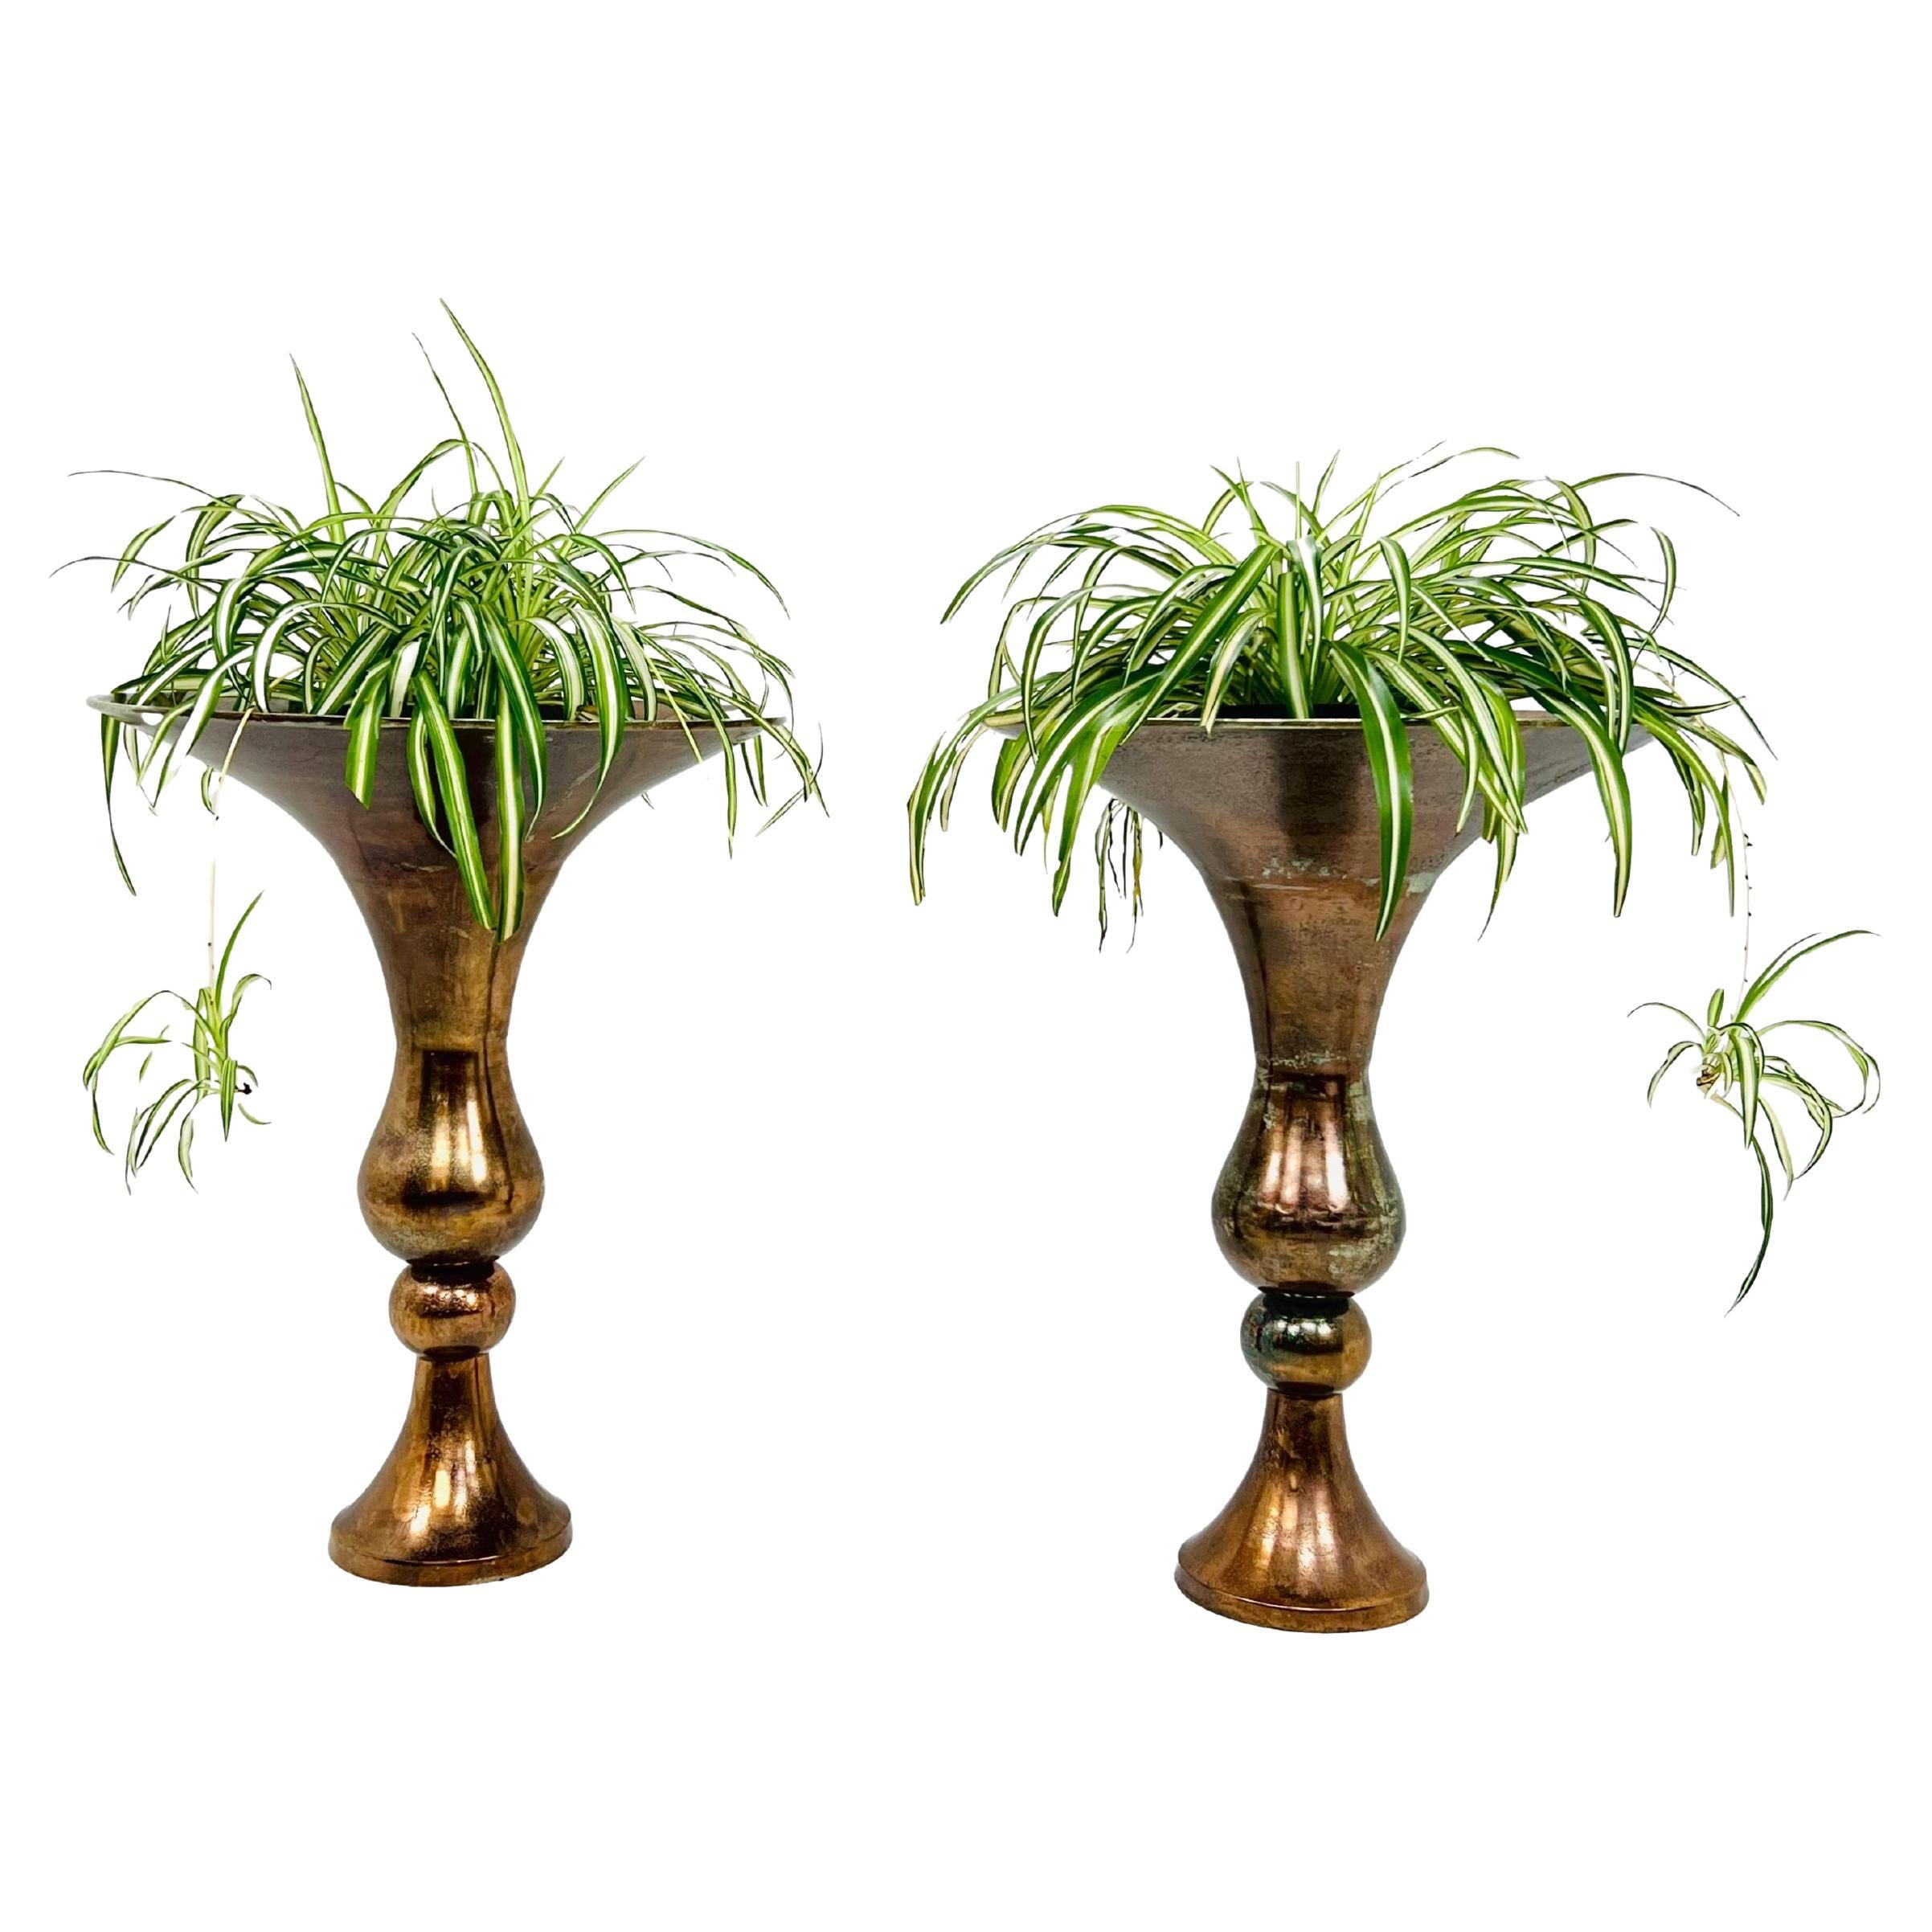 Pair of Large Copper Finish Metal Floor Vases For Sale